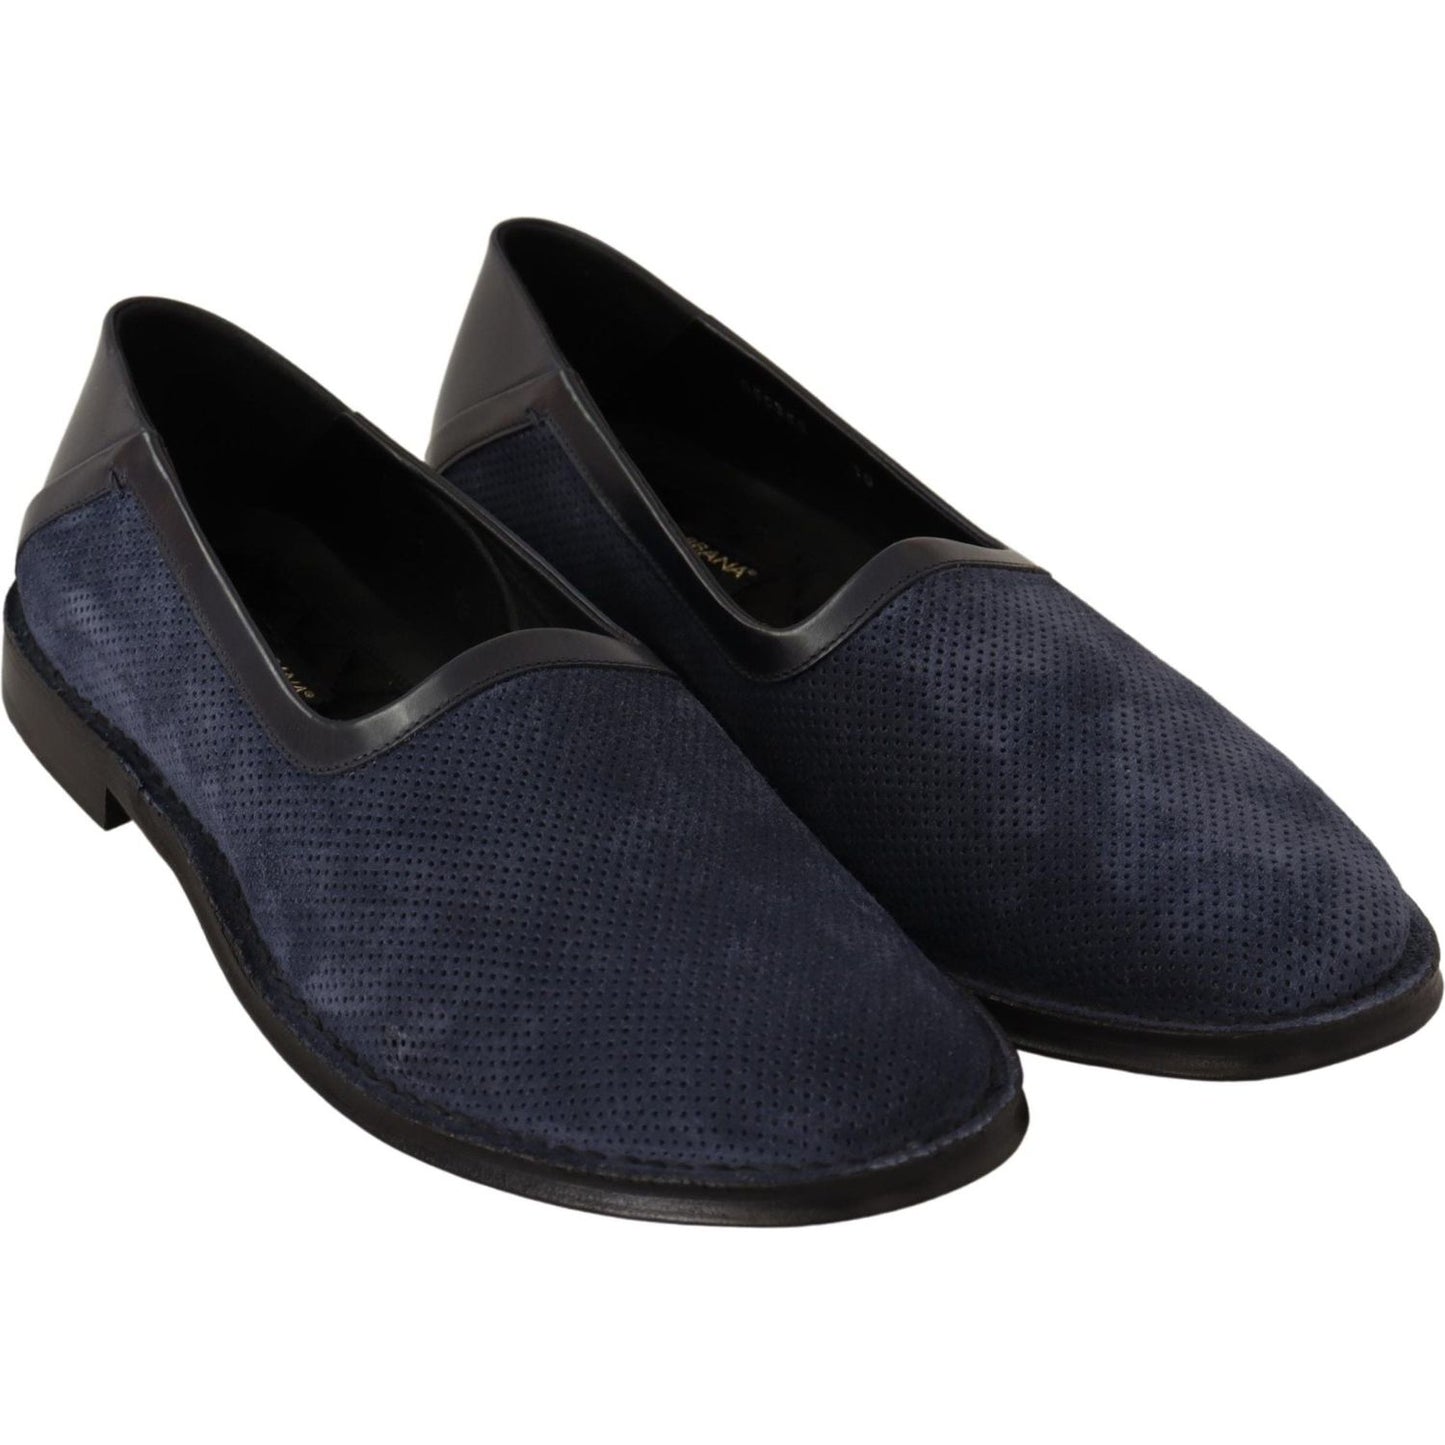 Dolce & Gabbana Elegant Perforated Leather Loafers blue-leather-perforated-slip-on-loafers-shoes MAN LOAFERS